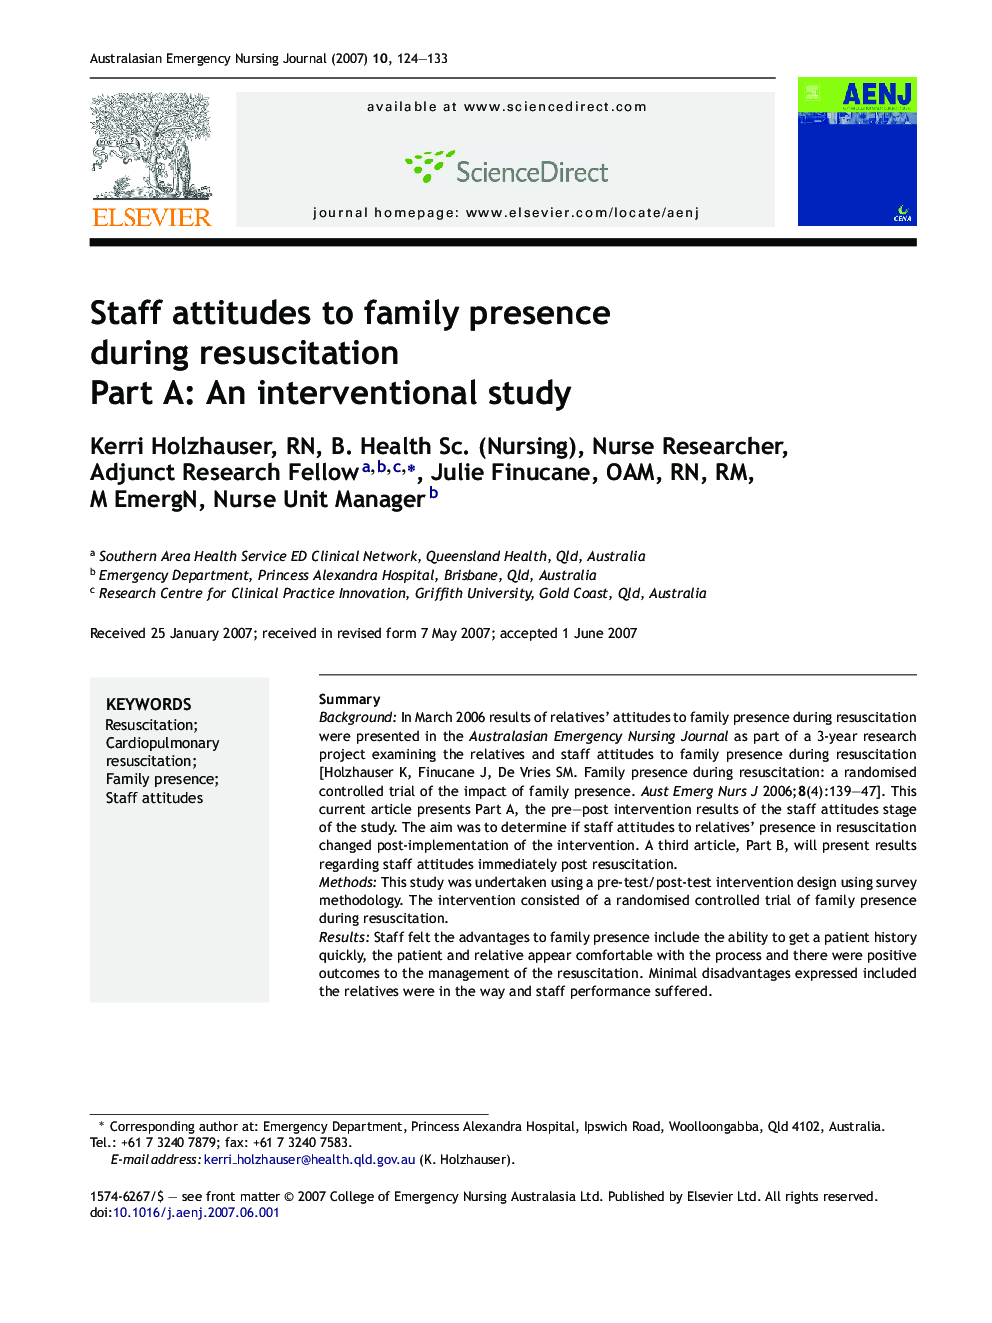 Staff attitudes to family presence during resuscitation: Part A: An interventional study